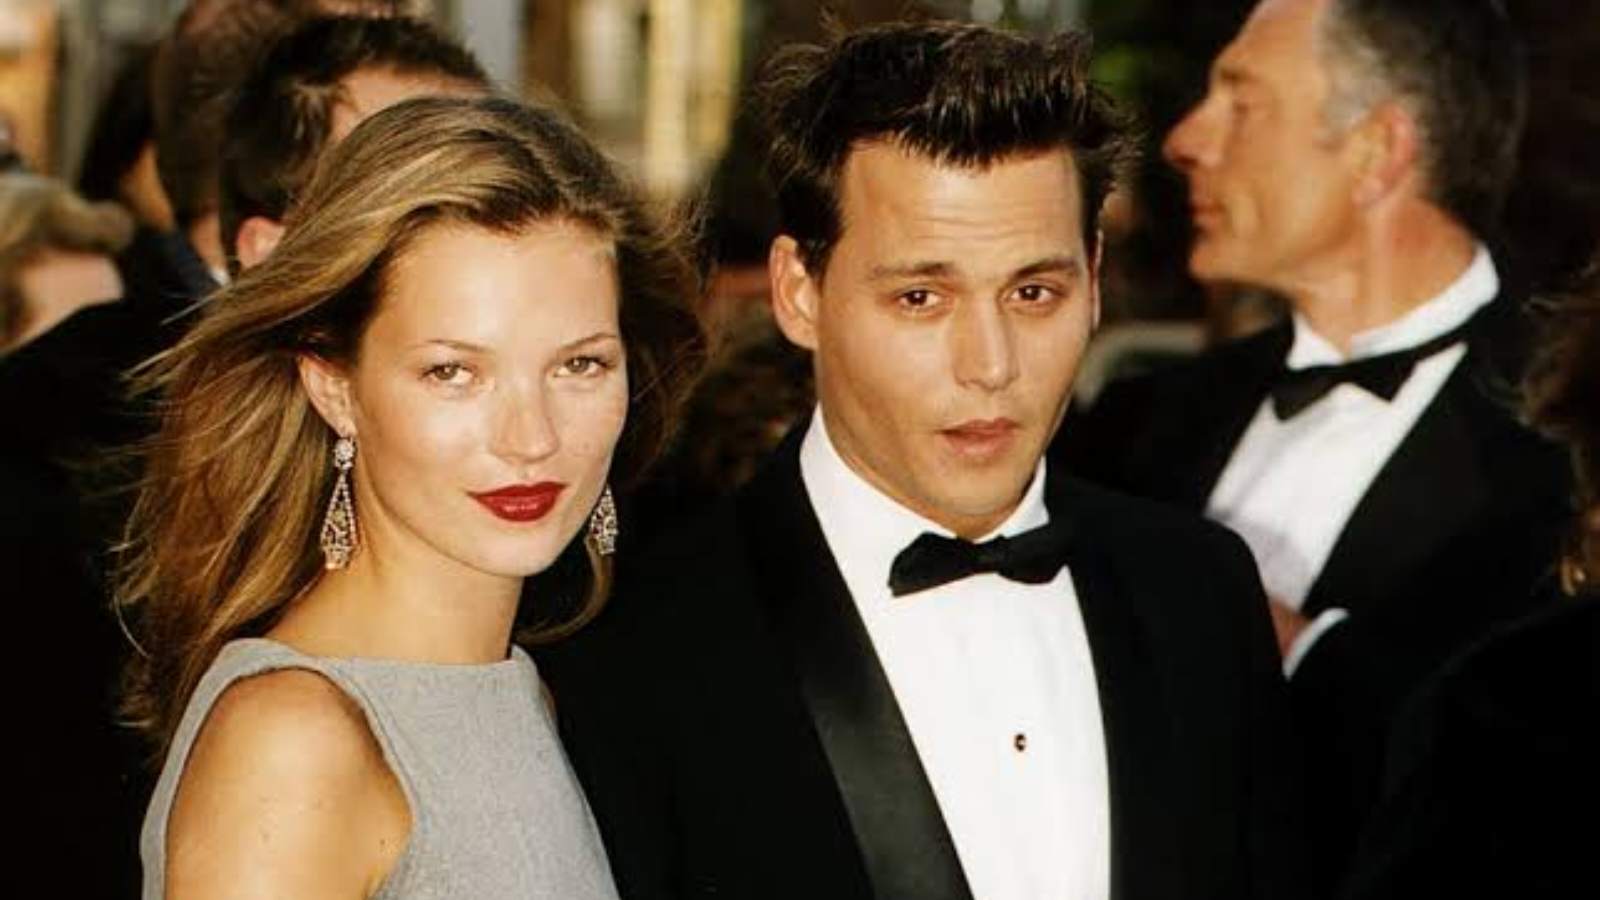 Kate Moss and Johnny Depp in their early days